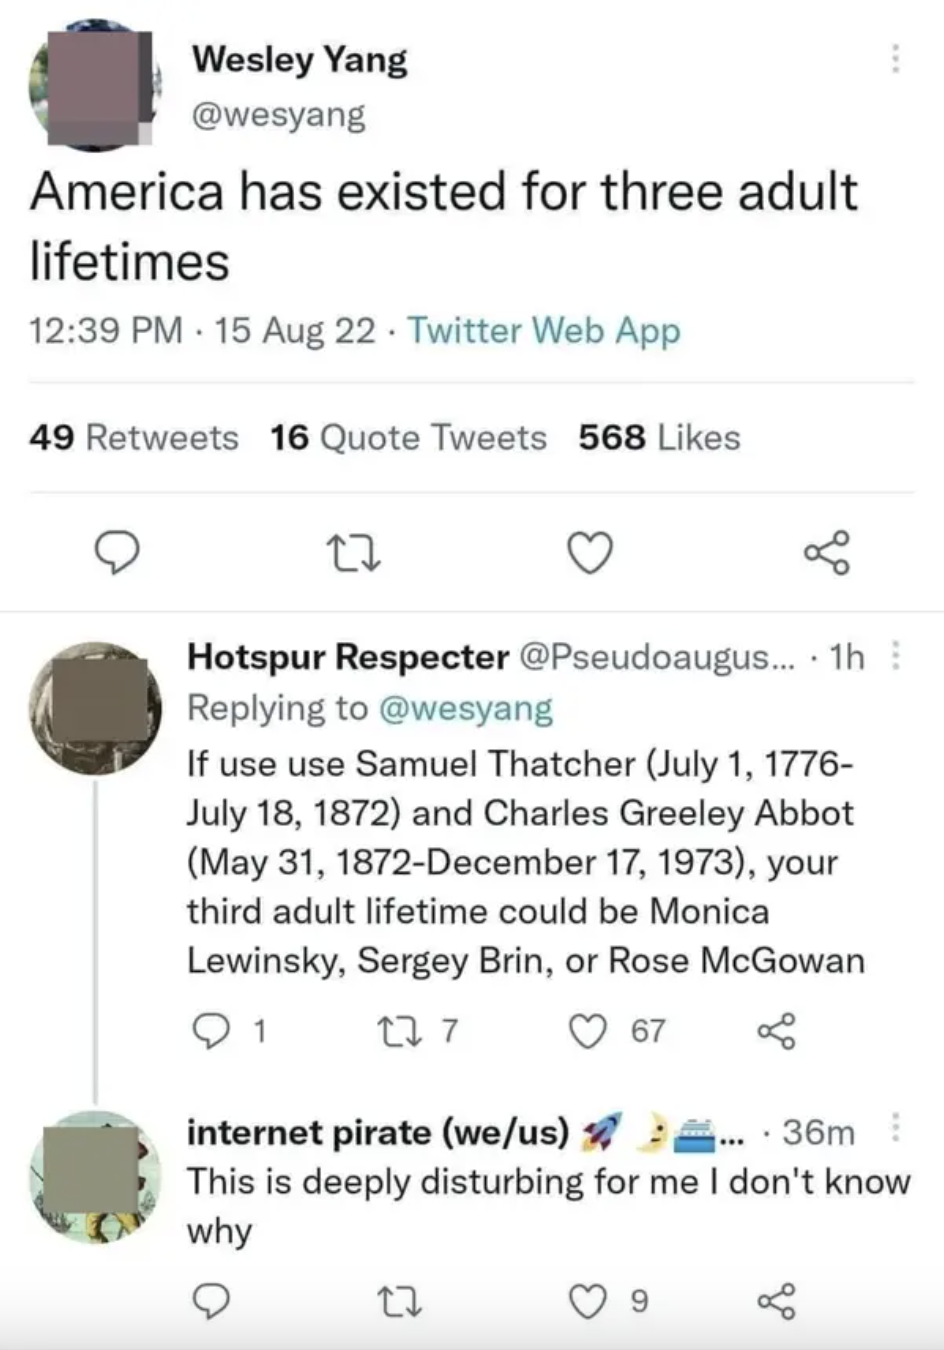 Social media post using the lifetimes of people who lived about 100 years each to illustrate the point that the US is only three adult lifetimes old